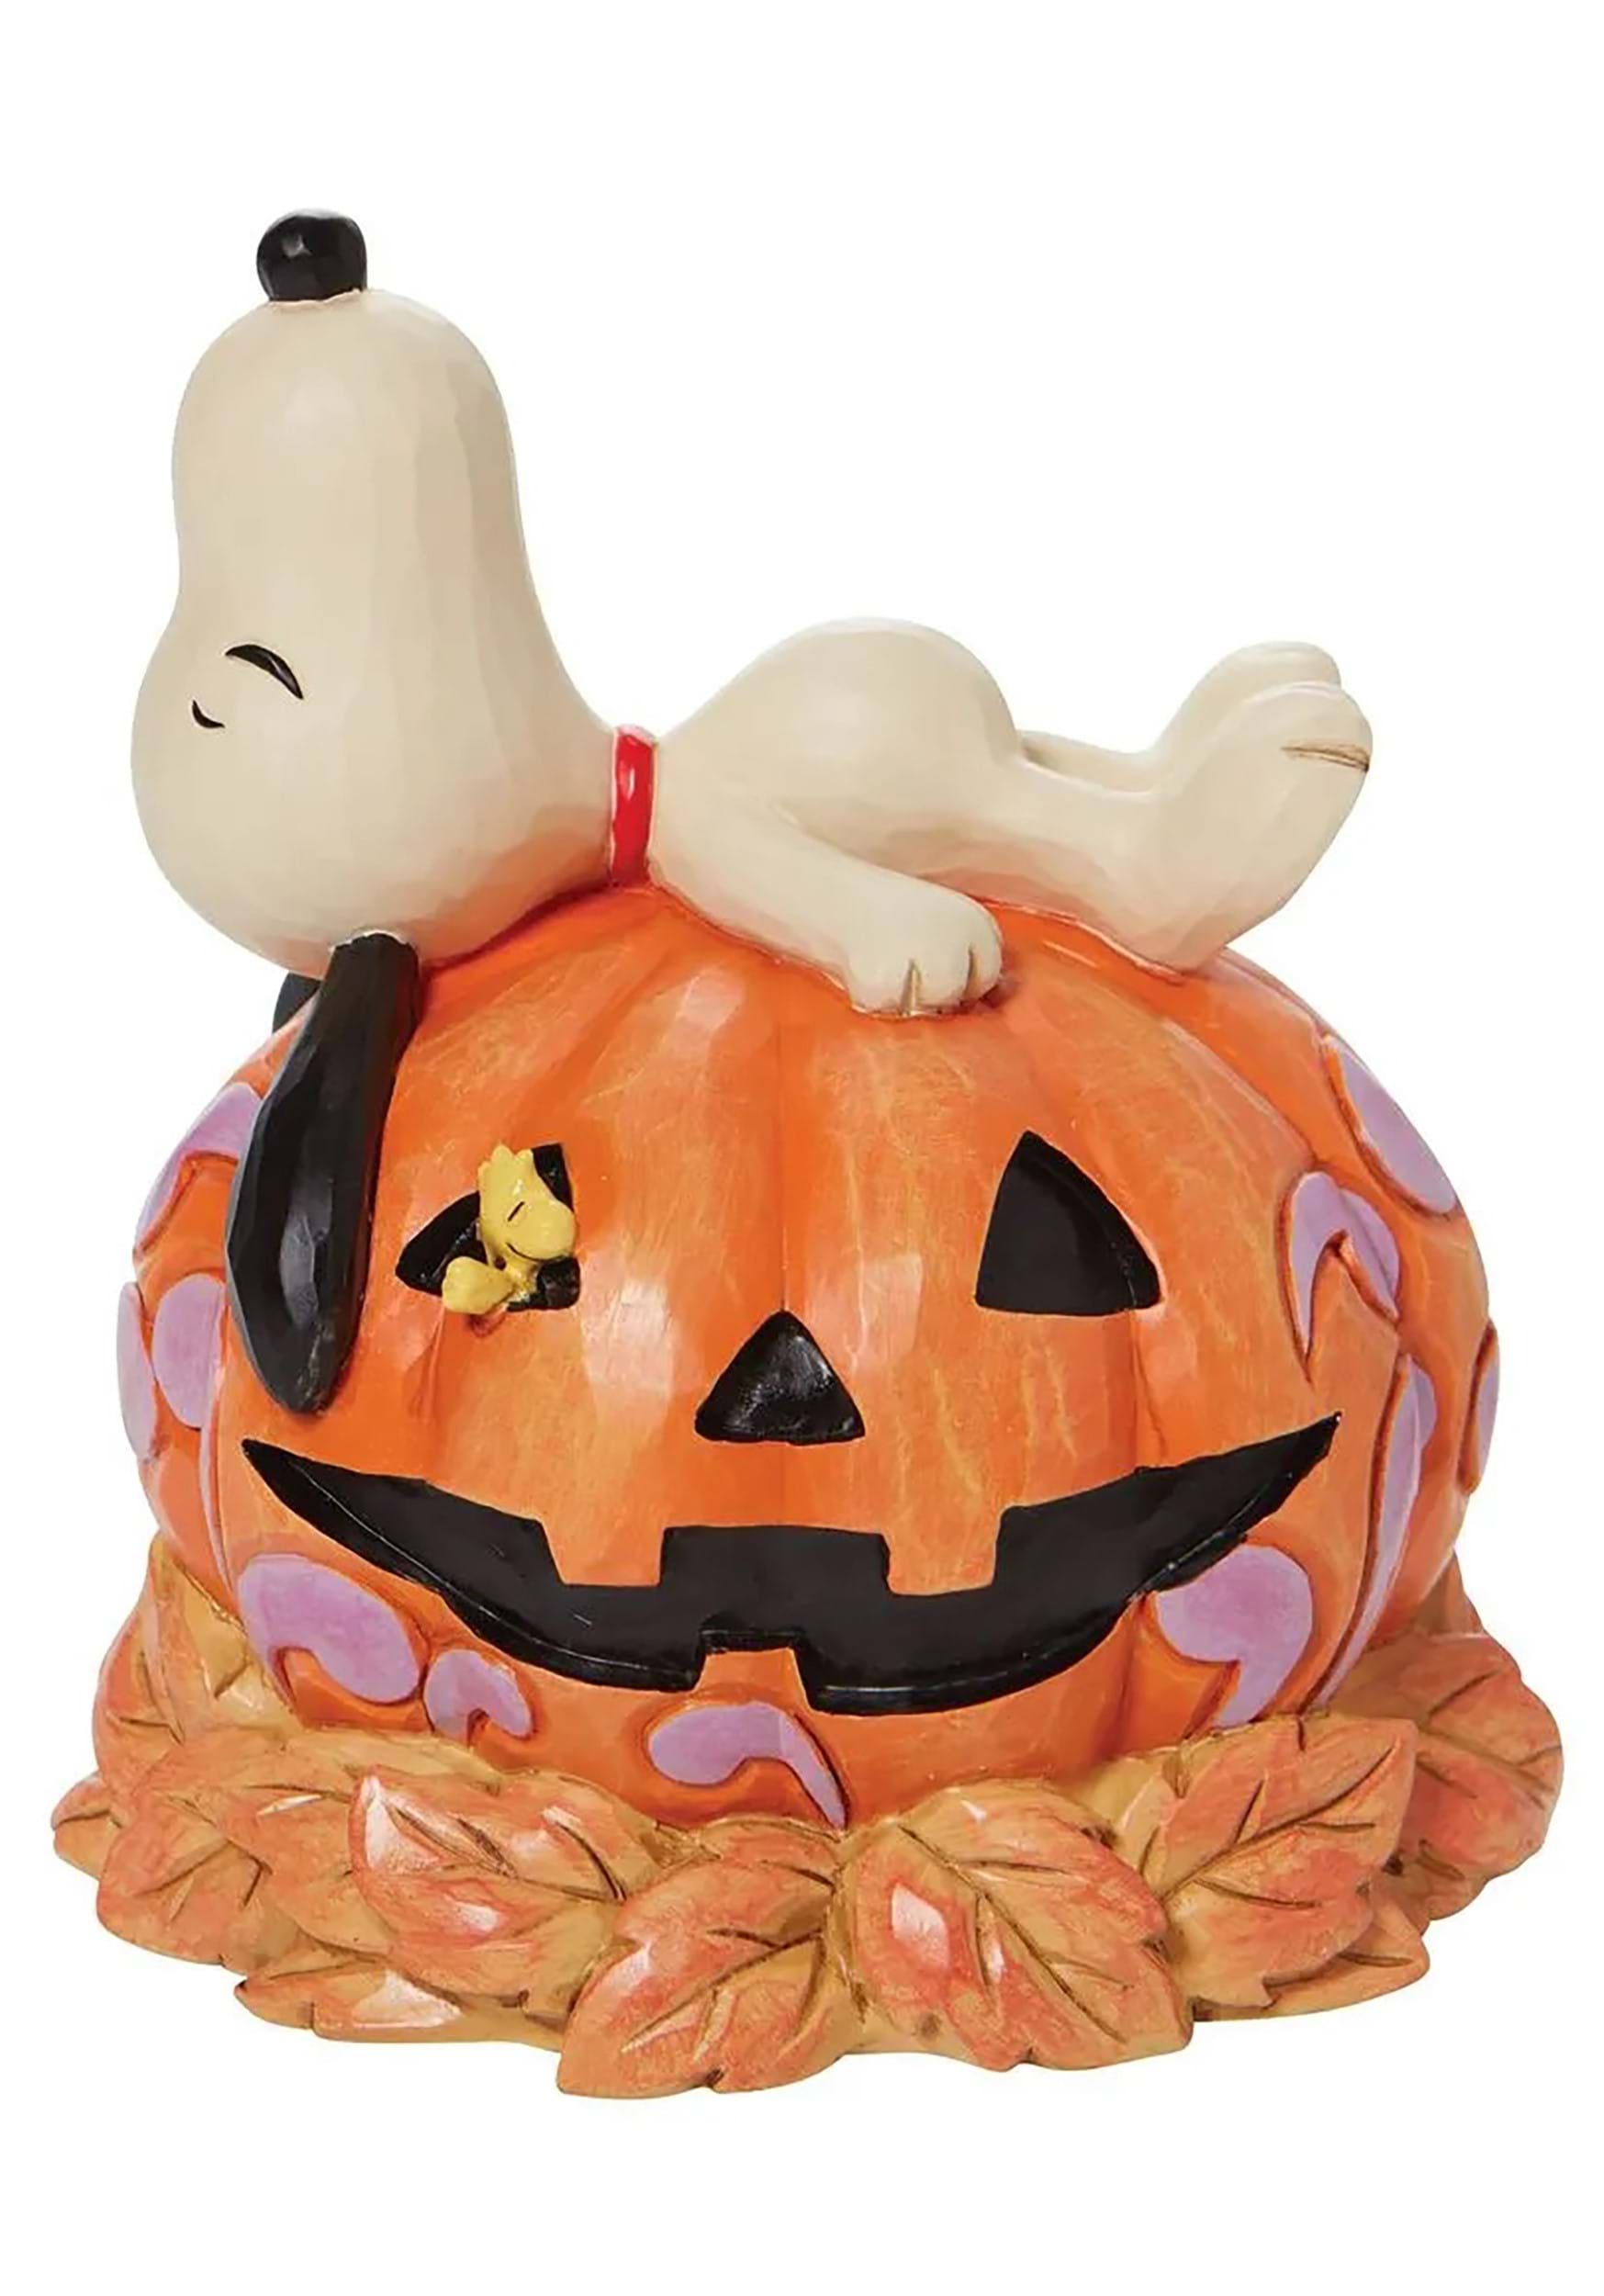 Snoopy Laying on Top of Carved Pumpkin Jim Shore Figure